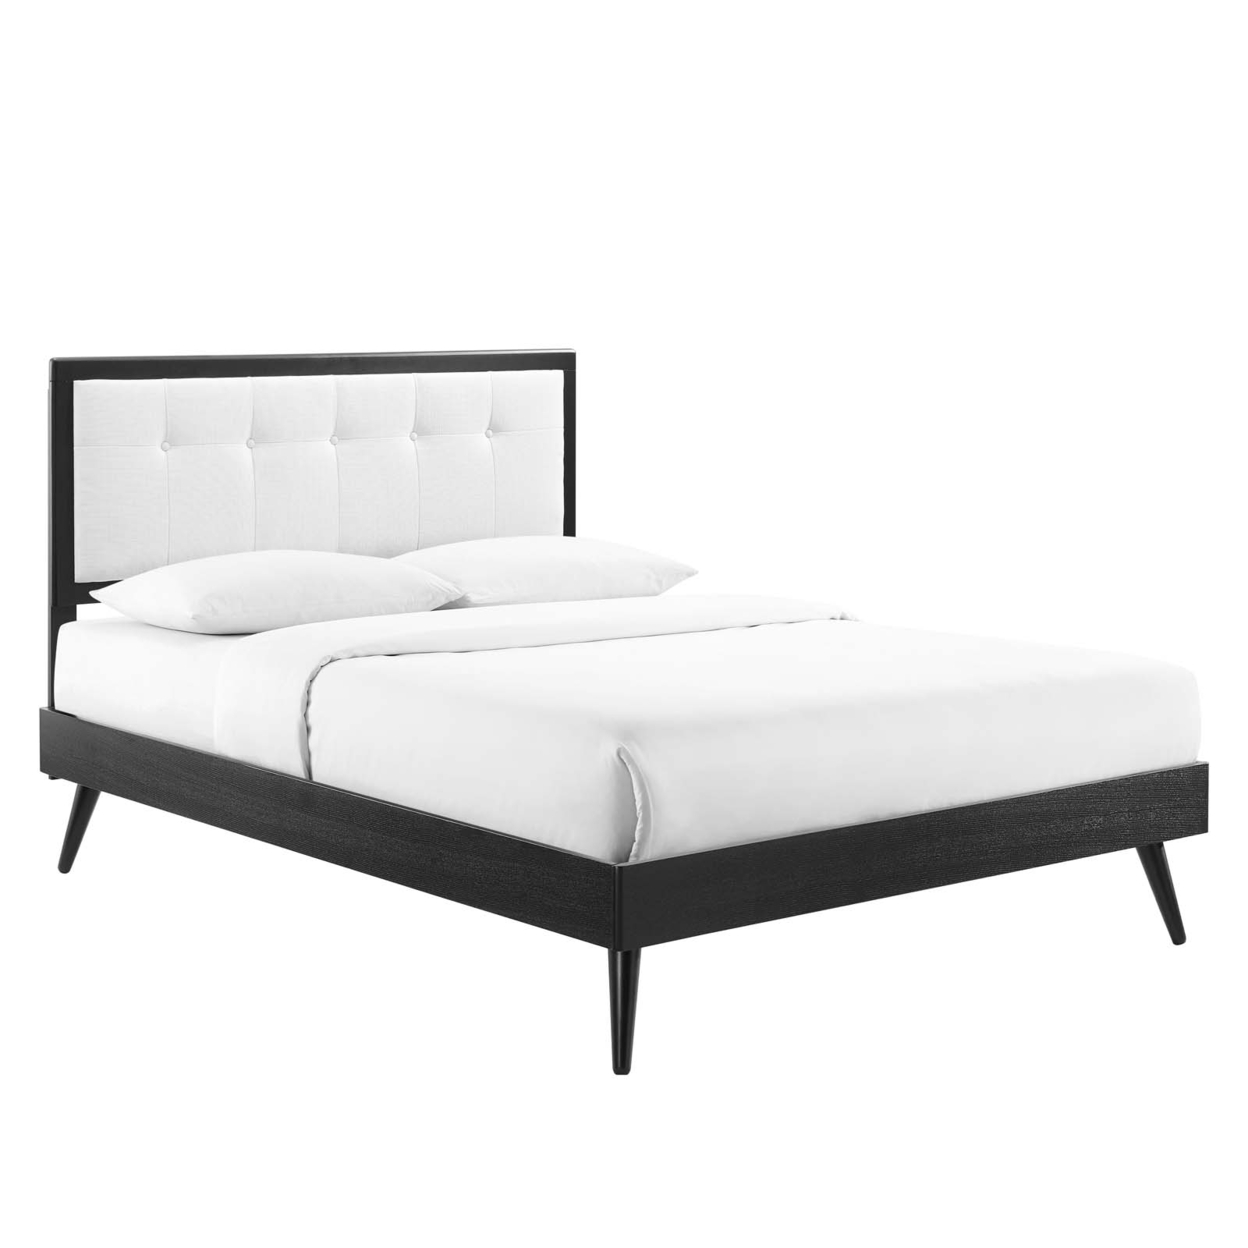 Willow King Wood Platform Bed With Splayed Legs, Black White